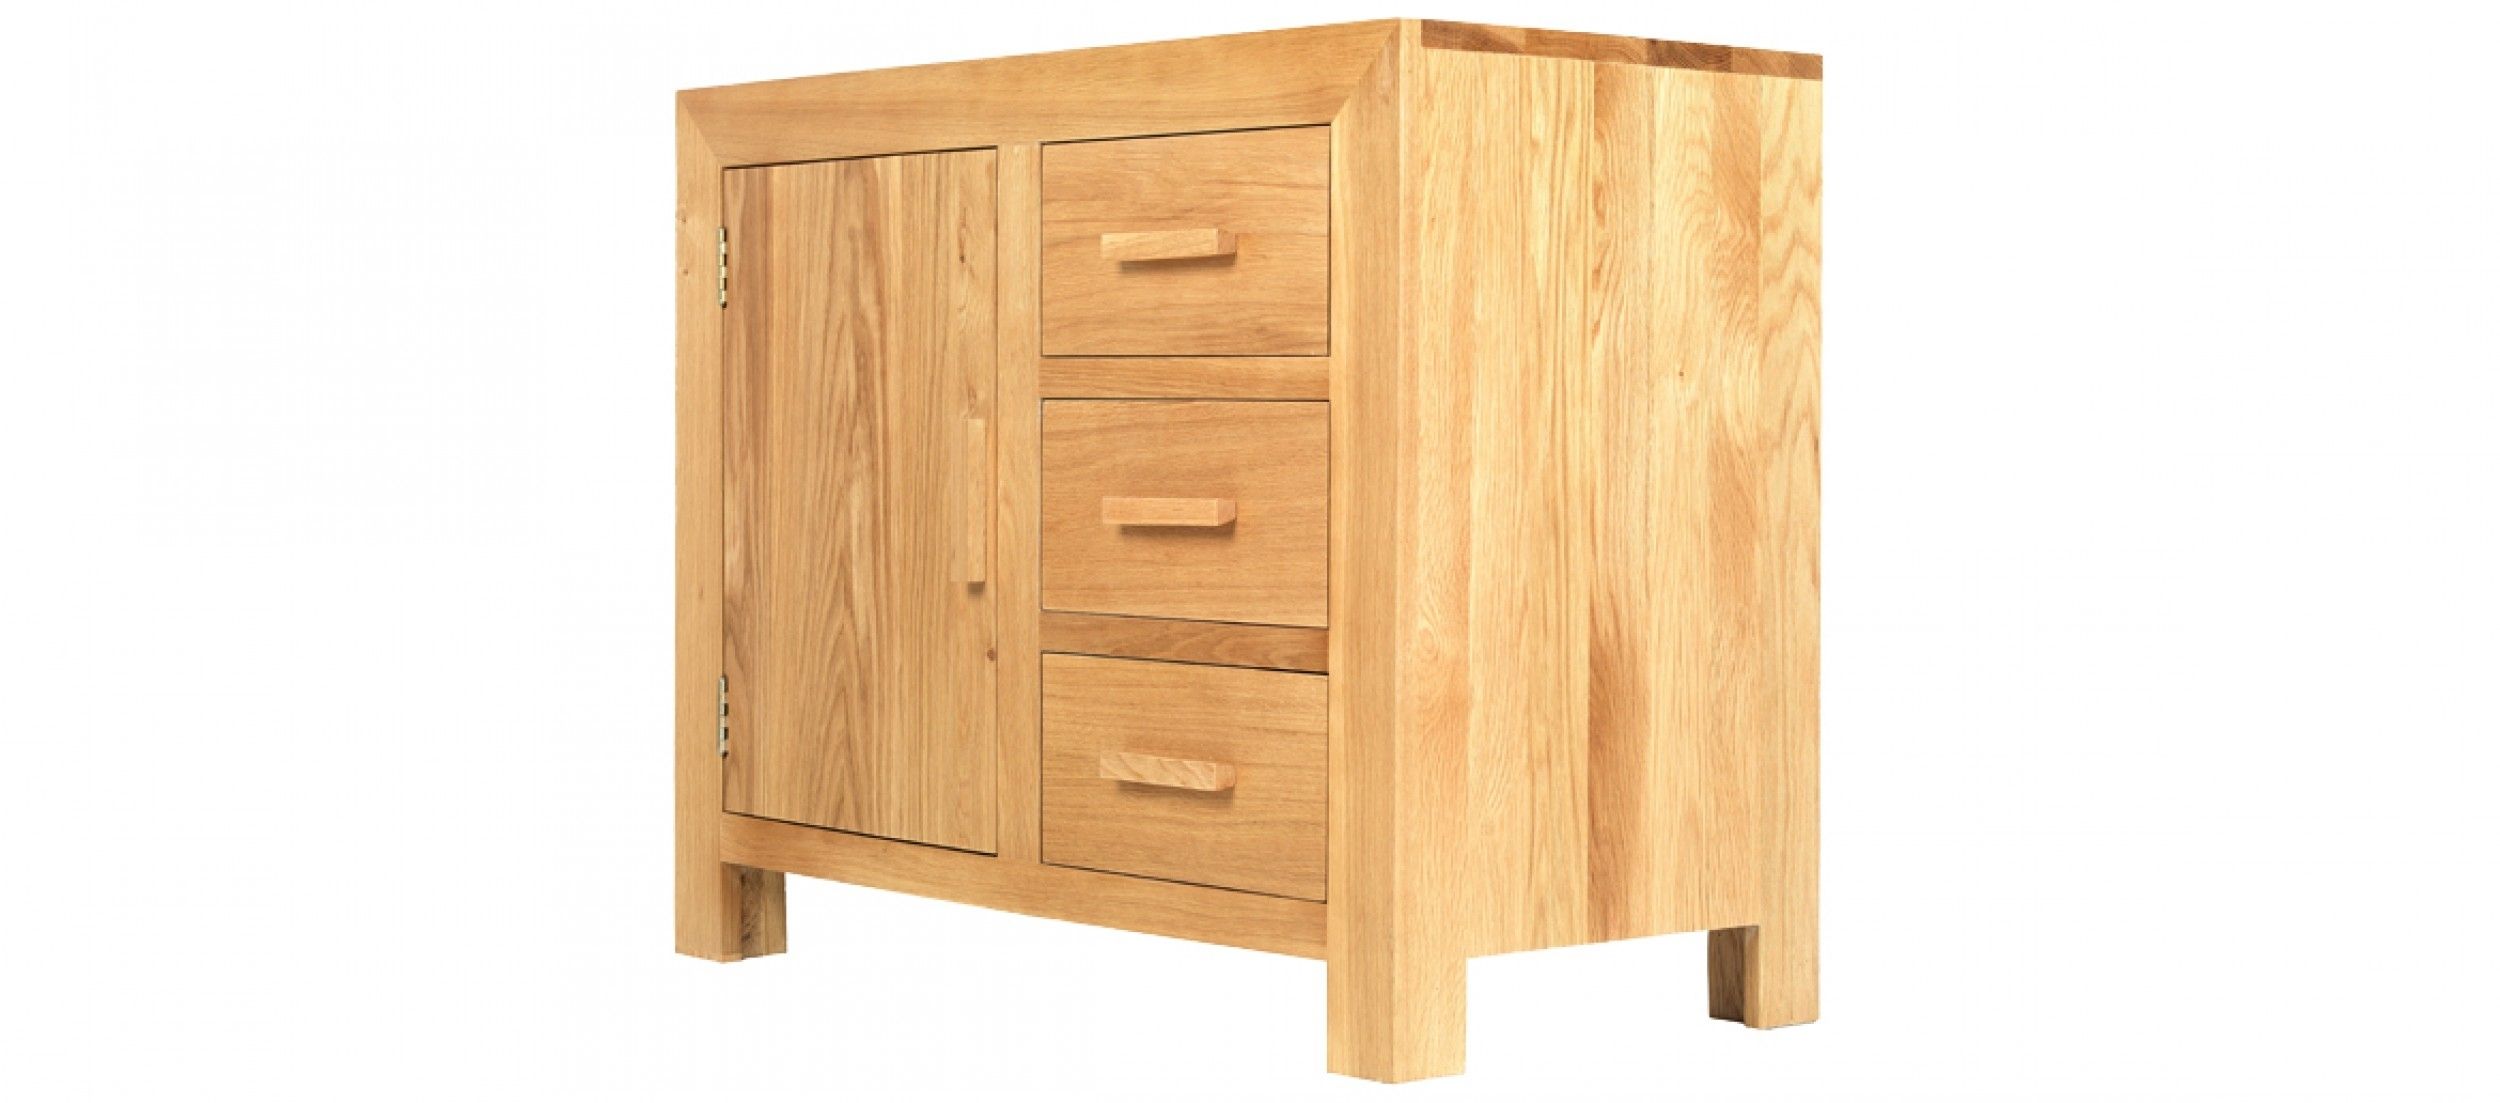 Cube Oak Small Sideboard | Quercus Living With 2 Door/2 Drawer Cast Jali Sideboards (View 13 of 30)